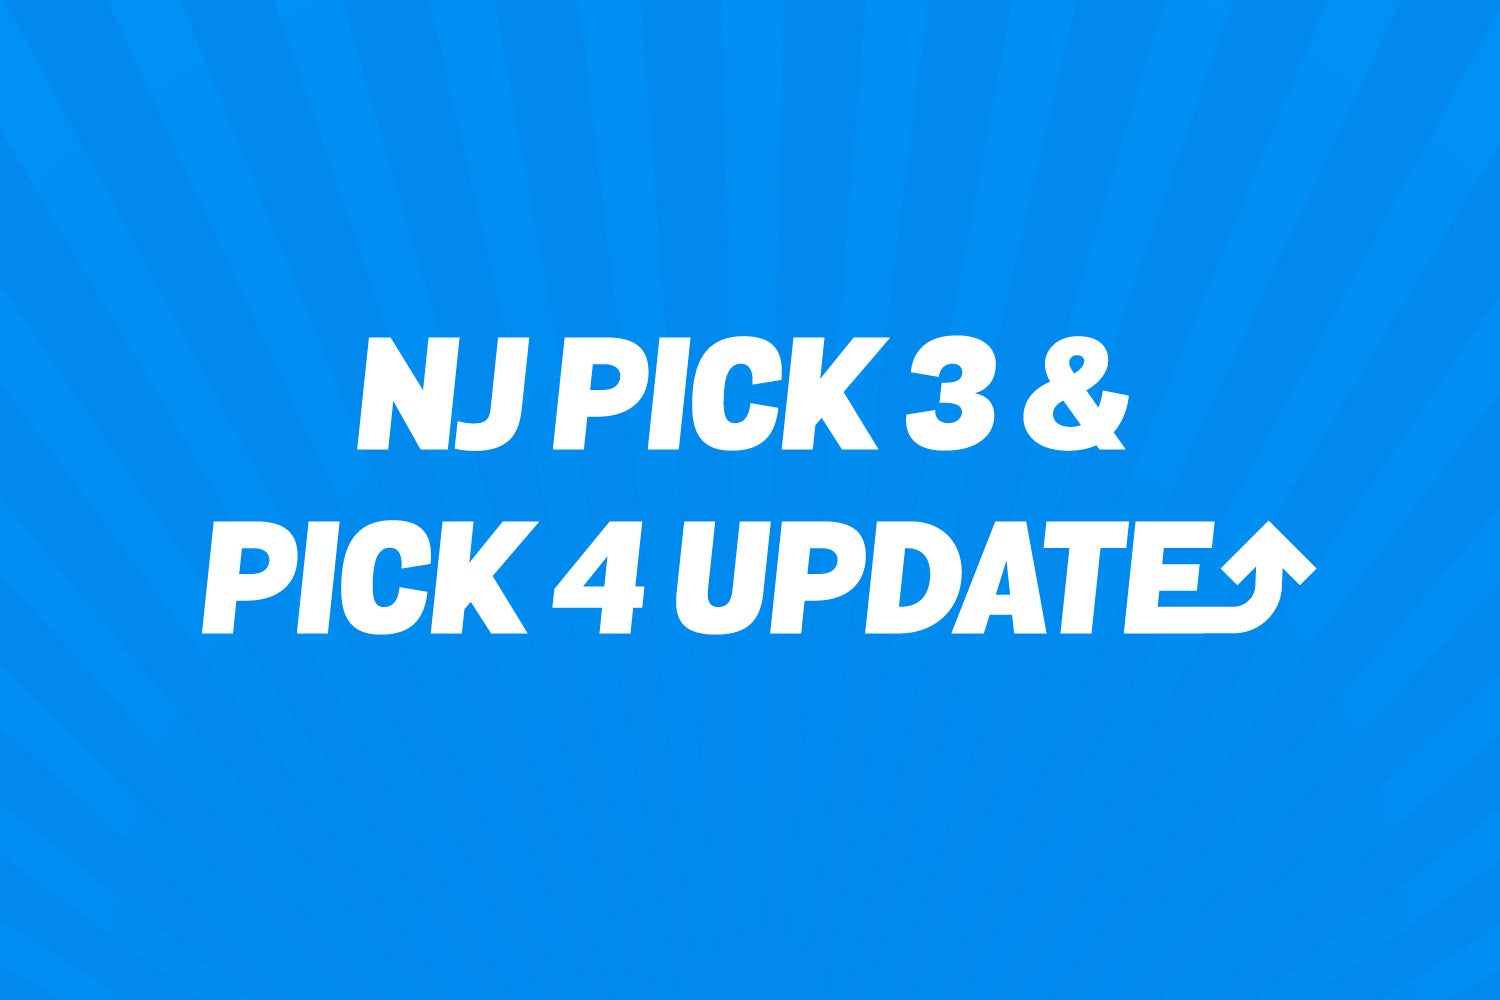 NJ Pick-3 and Pick-4 game changes